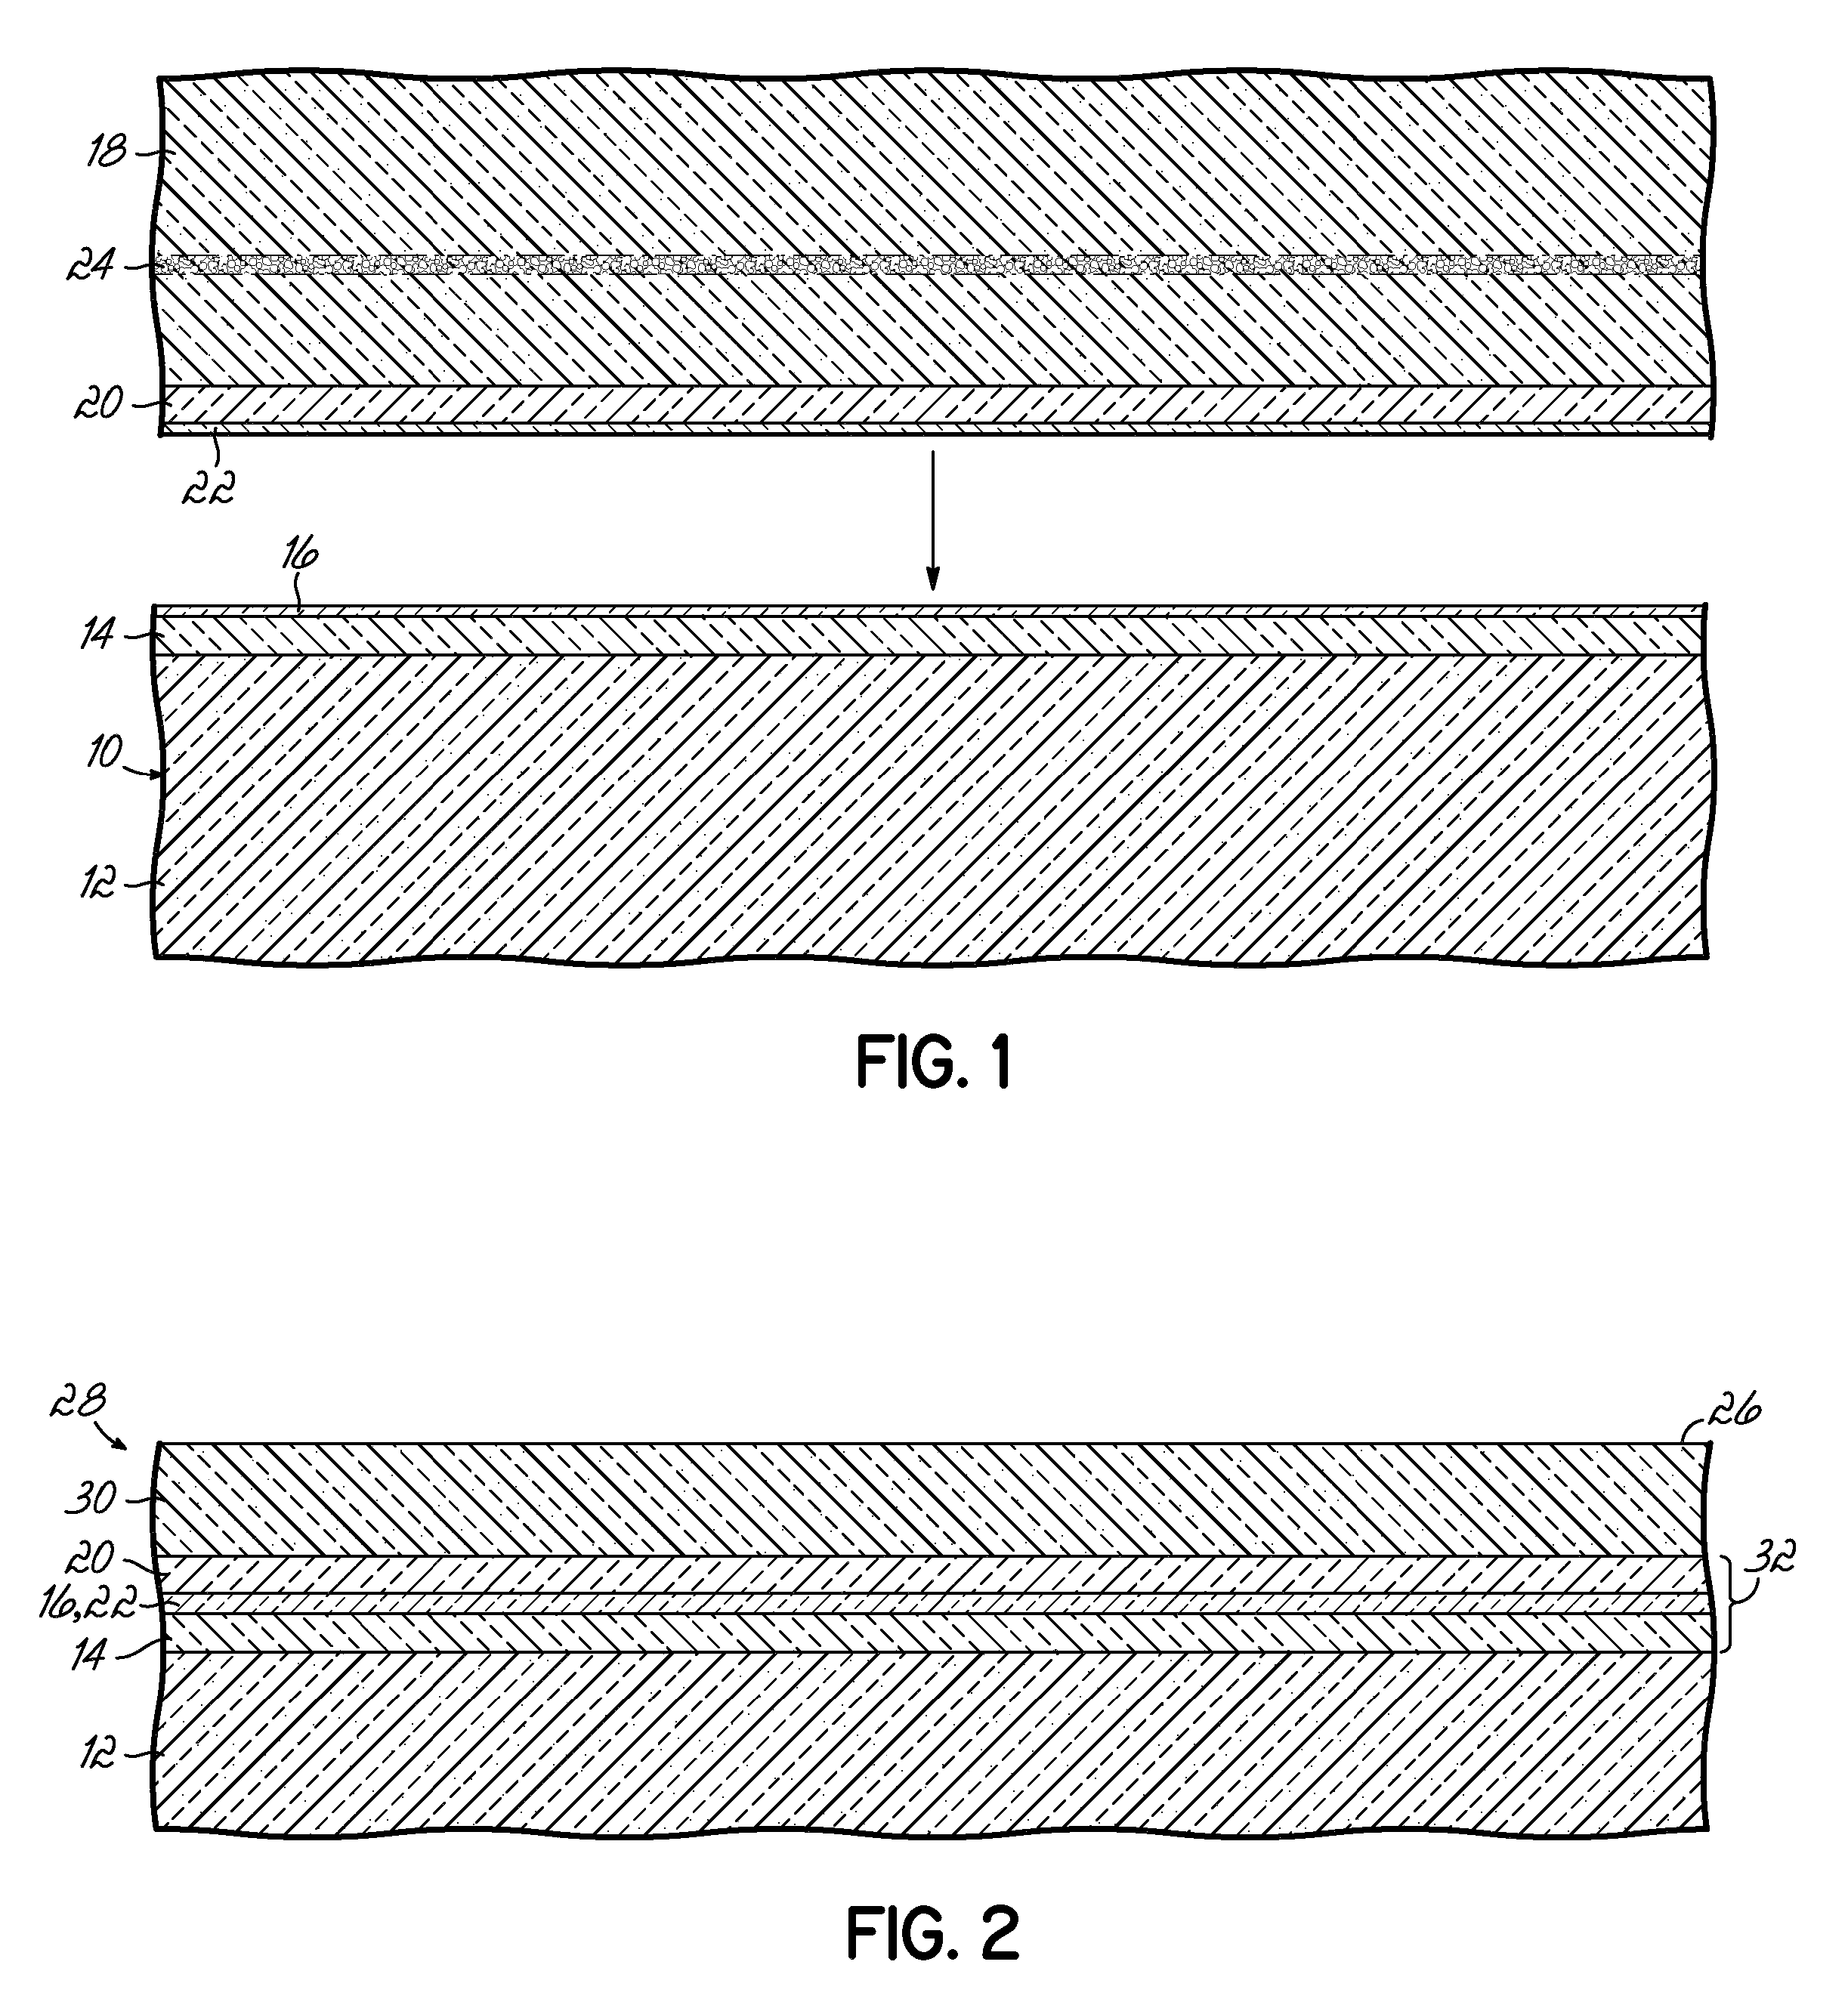 Structures incorporating semiconductor device structures with reduced junction capacitance and drain induced barrier lowering